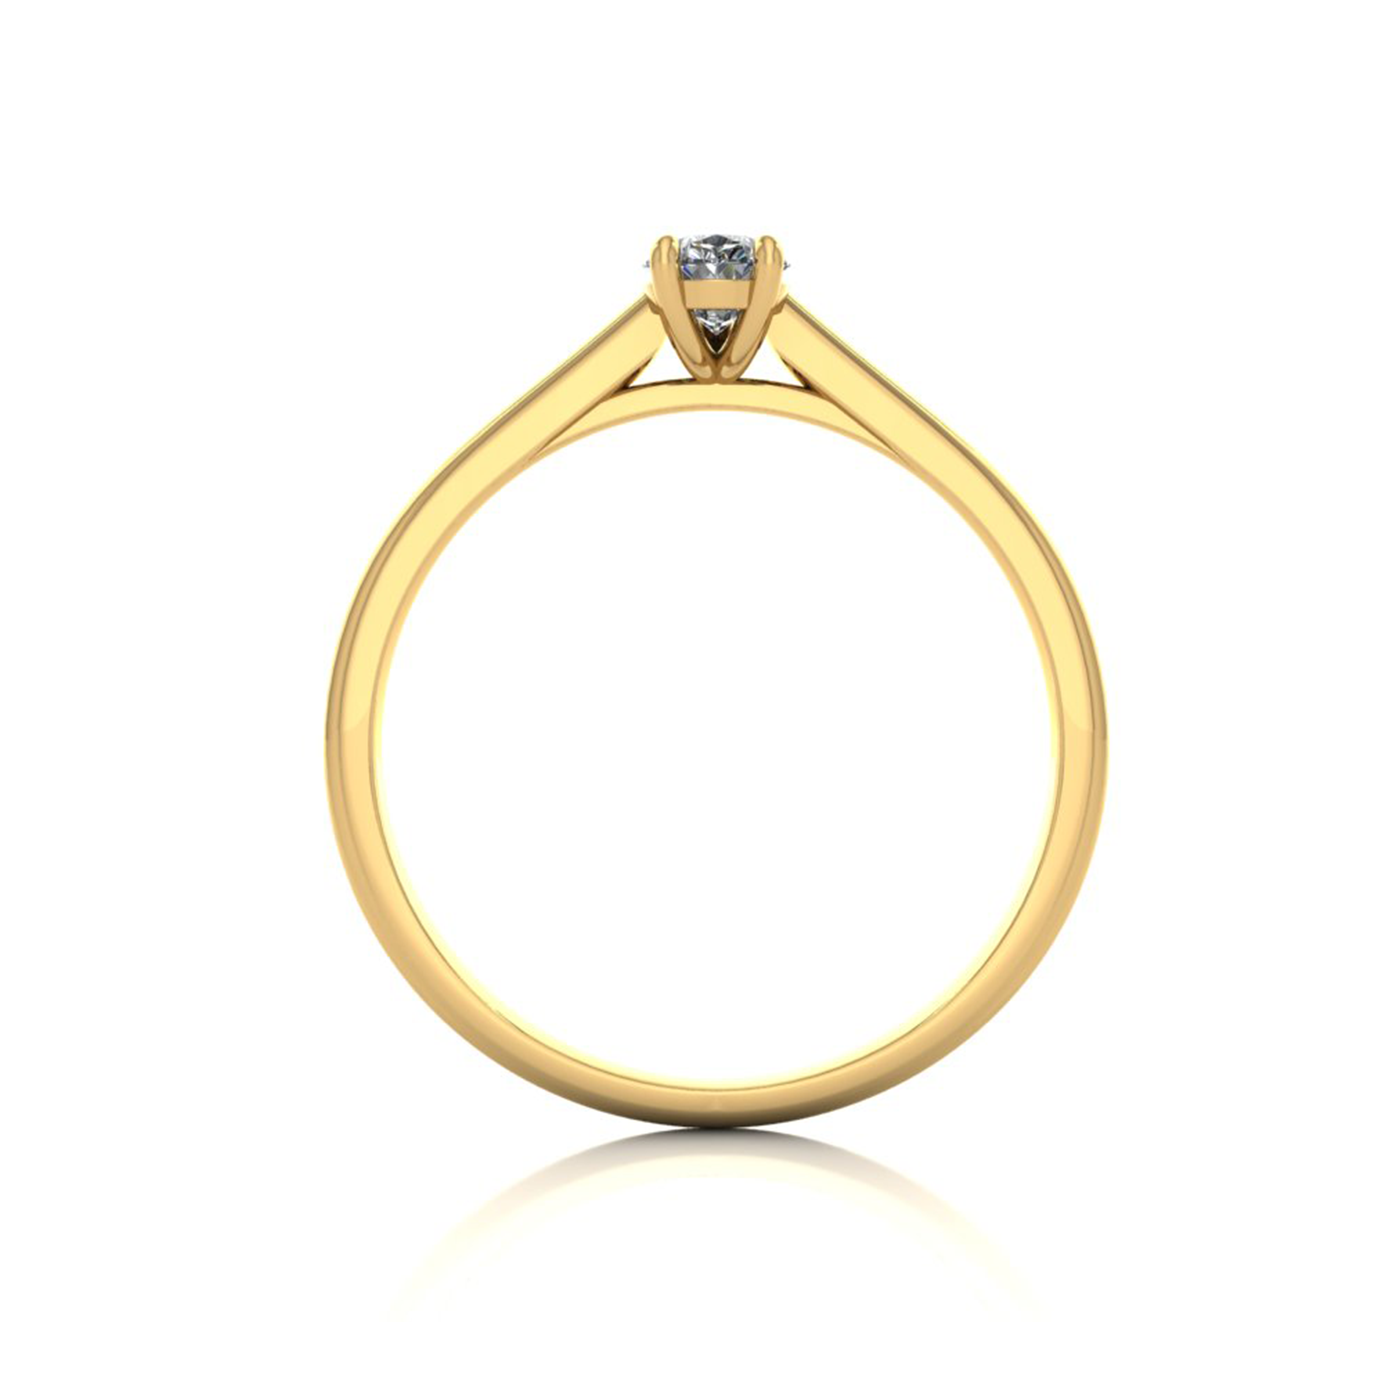 18k yellow gold  0,30 ct 3 prongs solitaire pear cut diamond engagement ring with whisper thin band